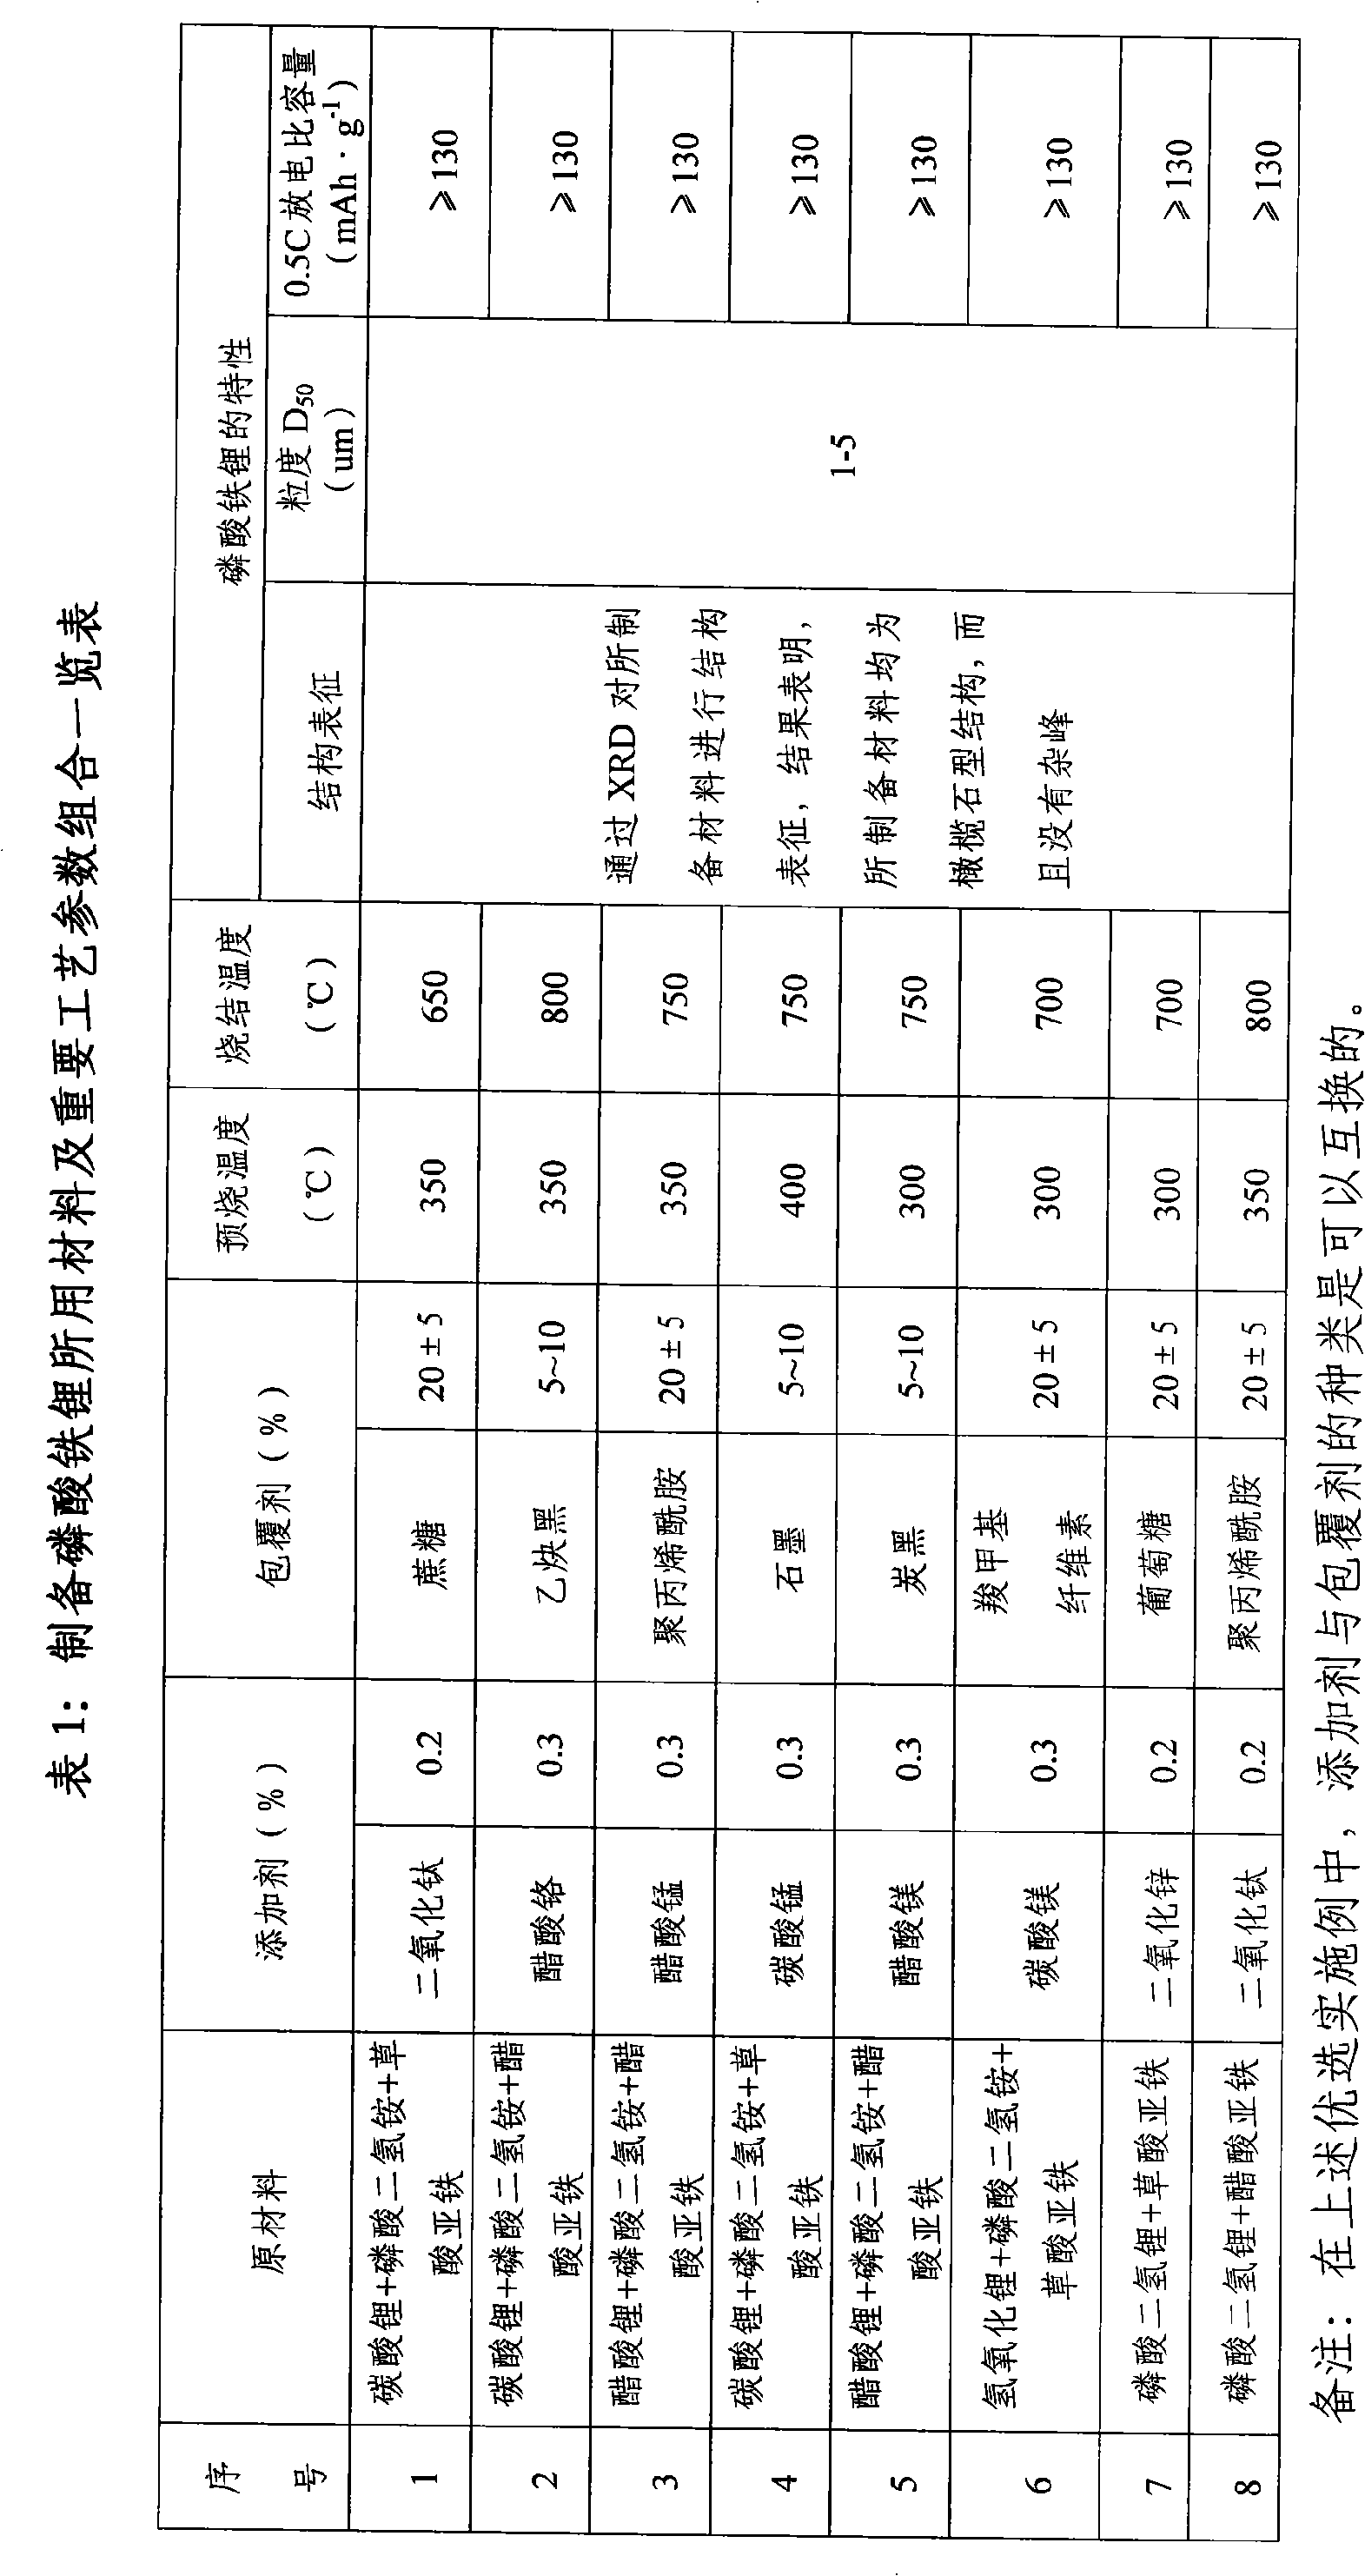 Preparation of lithium iron phosphate positive electrode material for lithium ion power cell